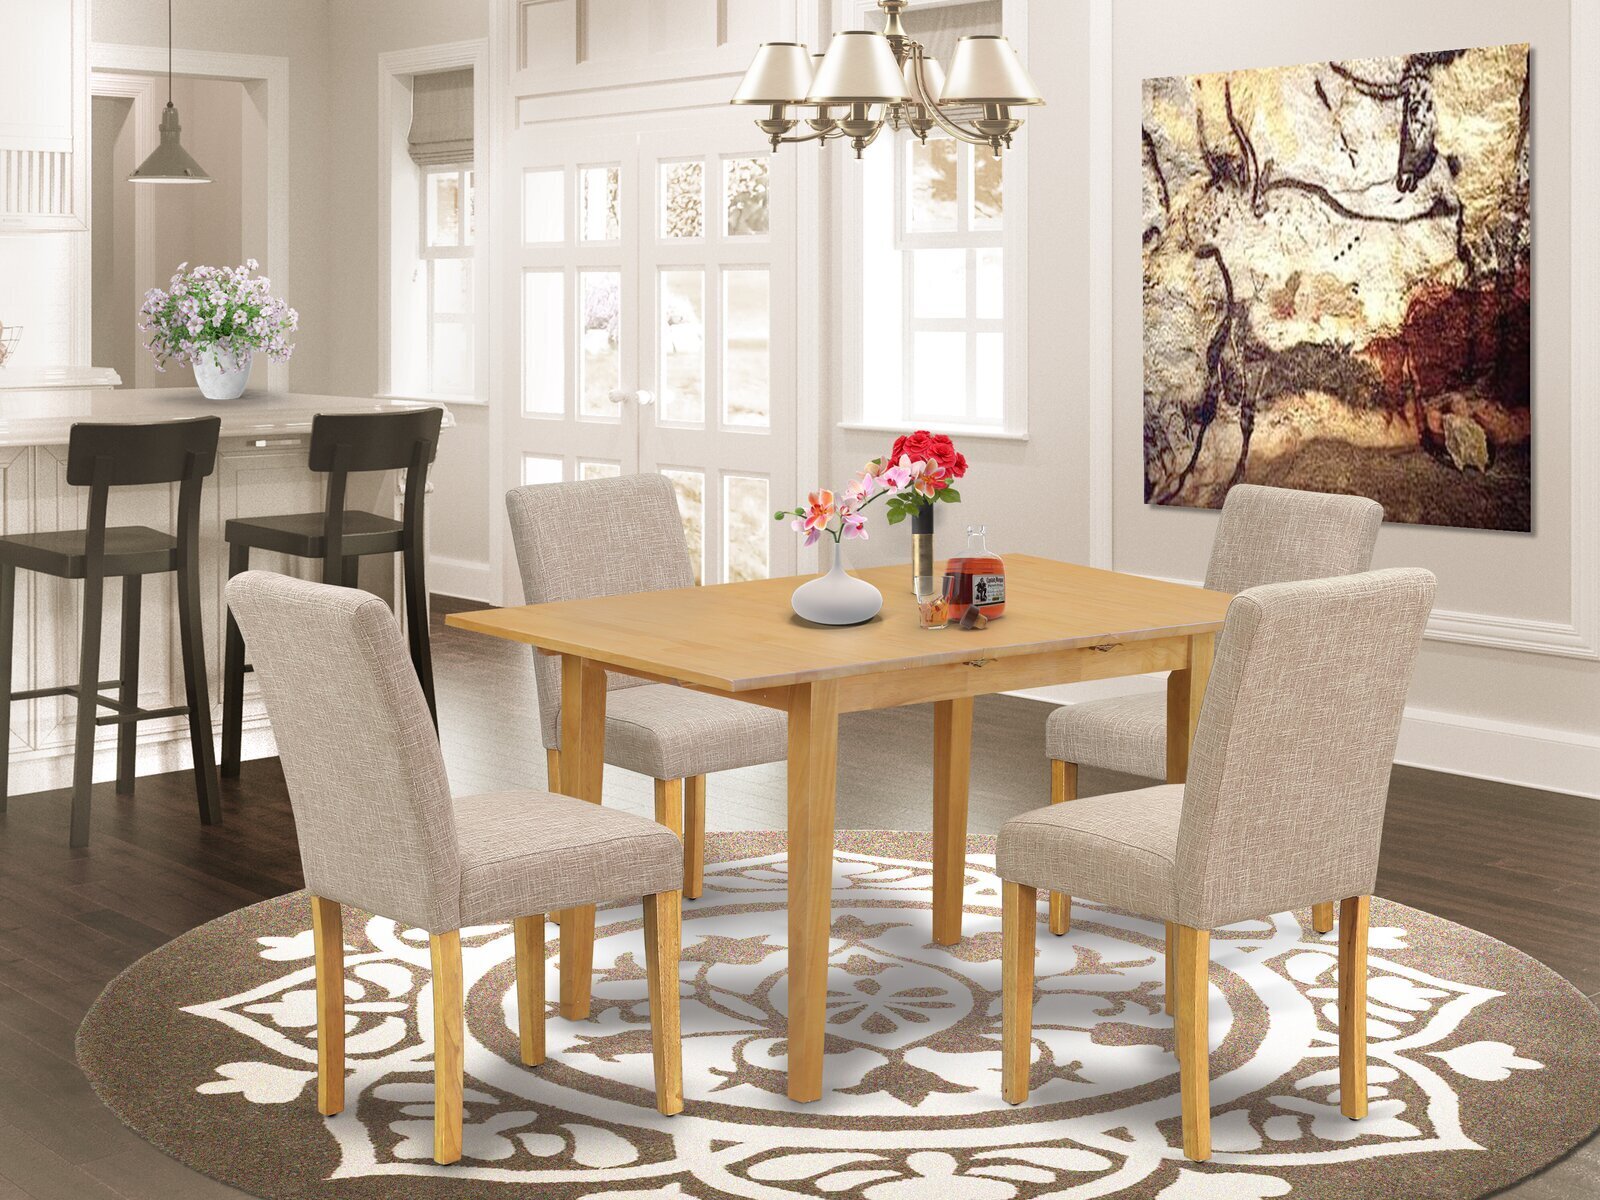 Butterfly leaf dining table set with contemporary flair 